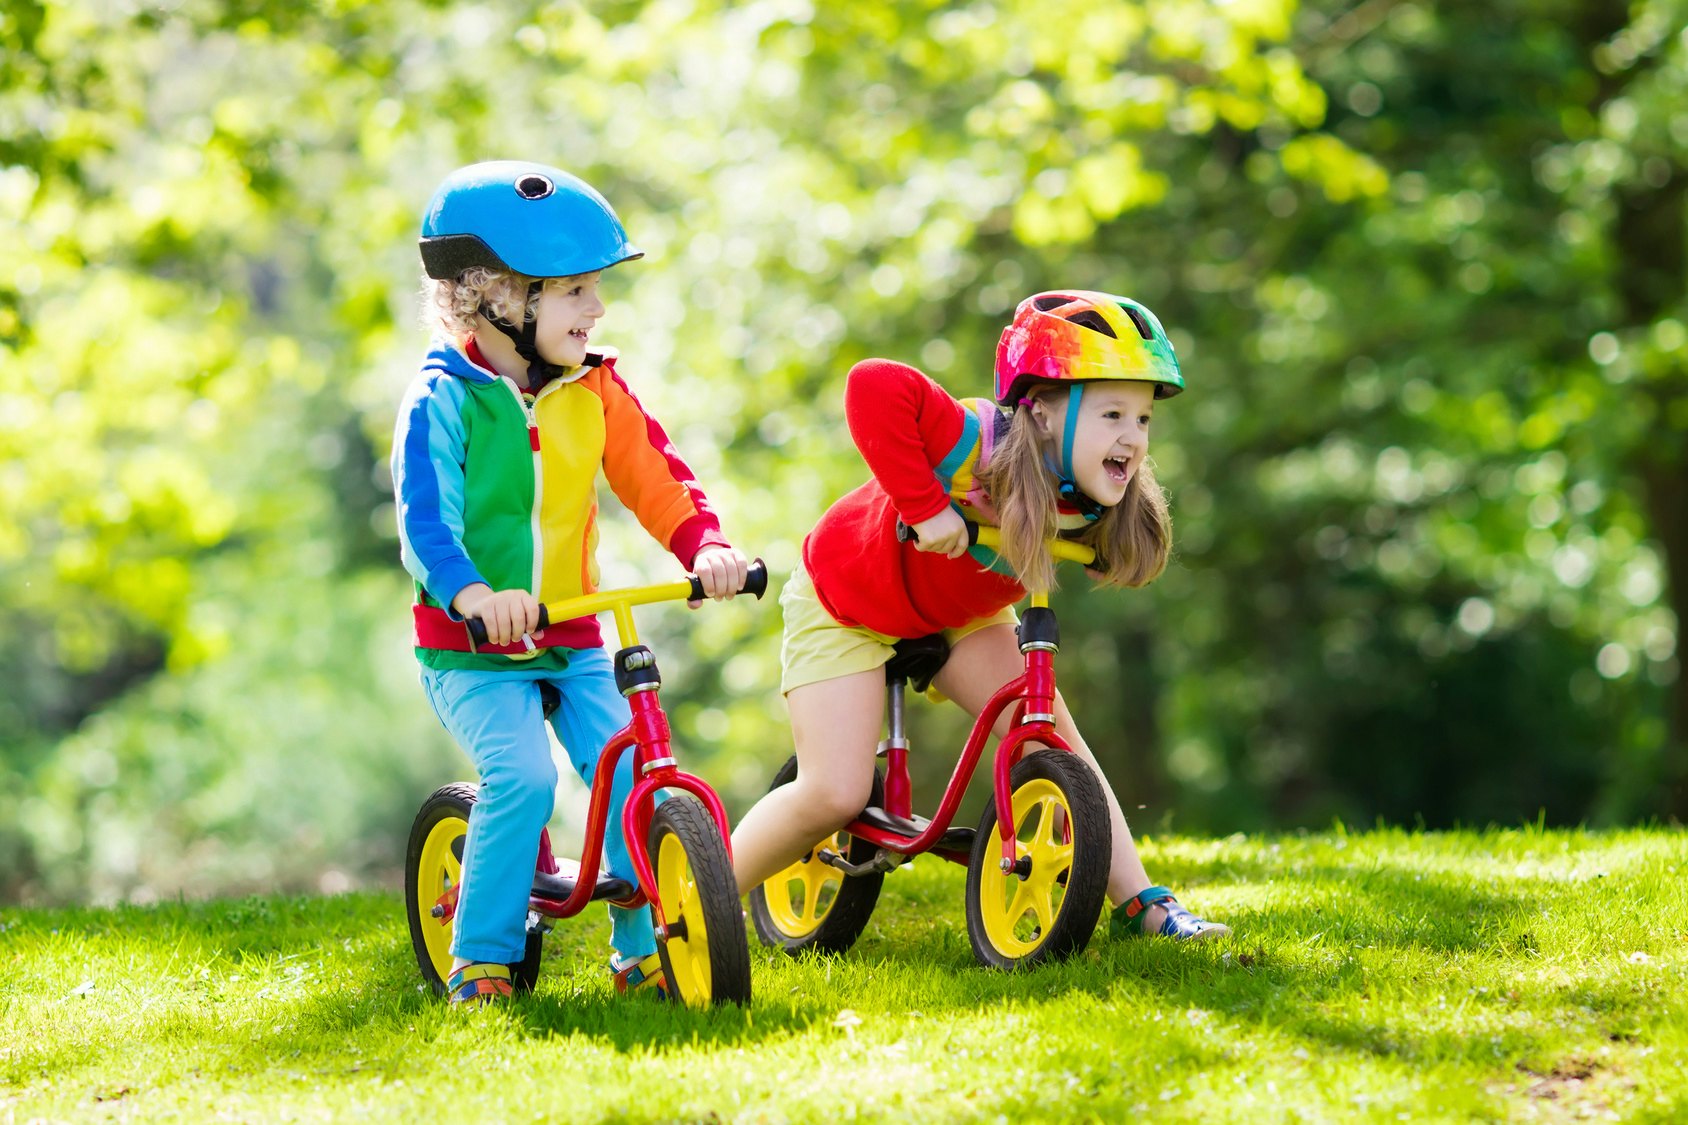 when can a child ride a bike